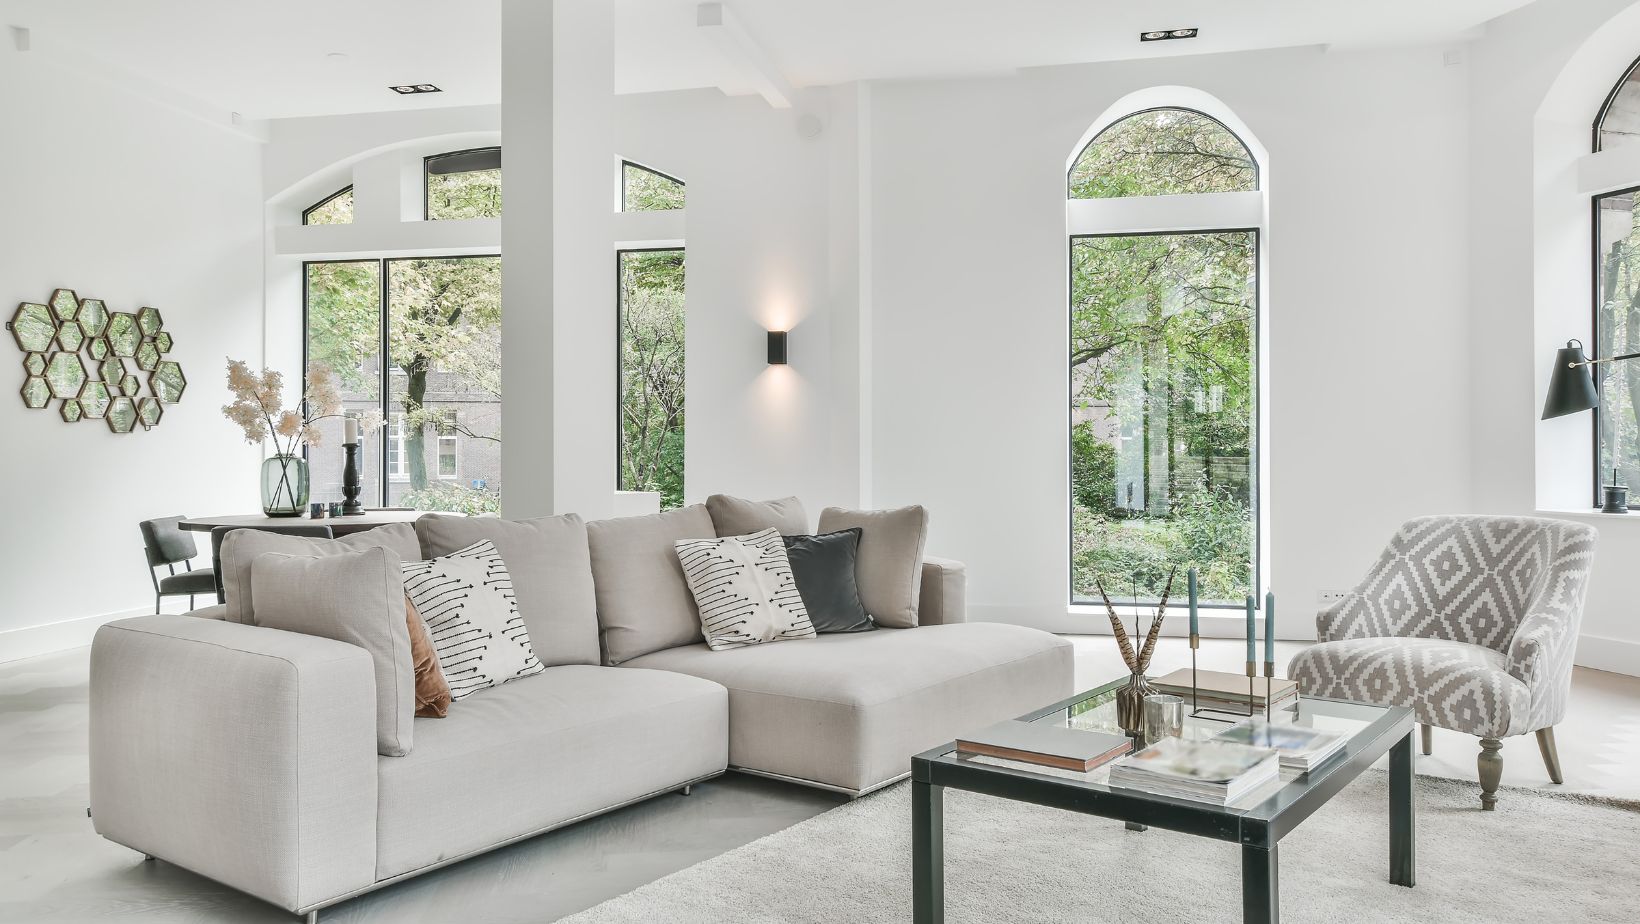 A white livingroom with a white couch and gray & white chair.